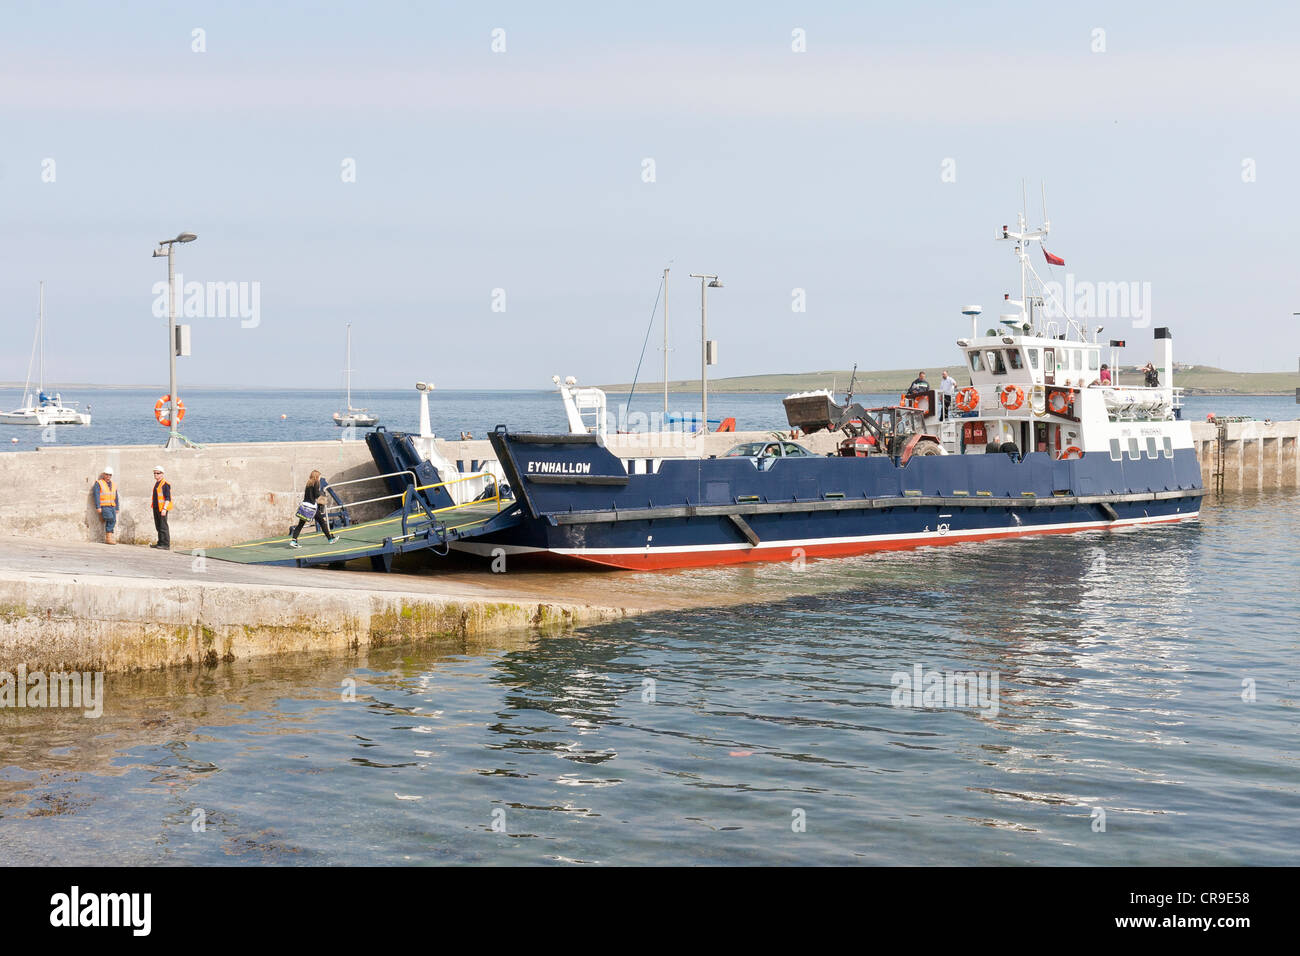 The Island of Rousay - Orkney Islands, Scotland. The ferry arriving Stock Photo